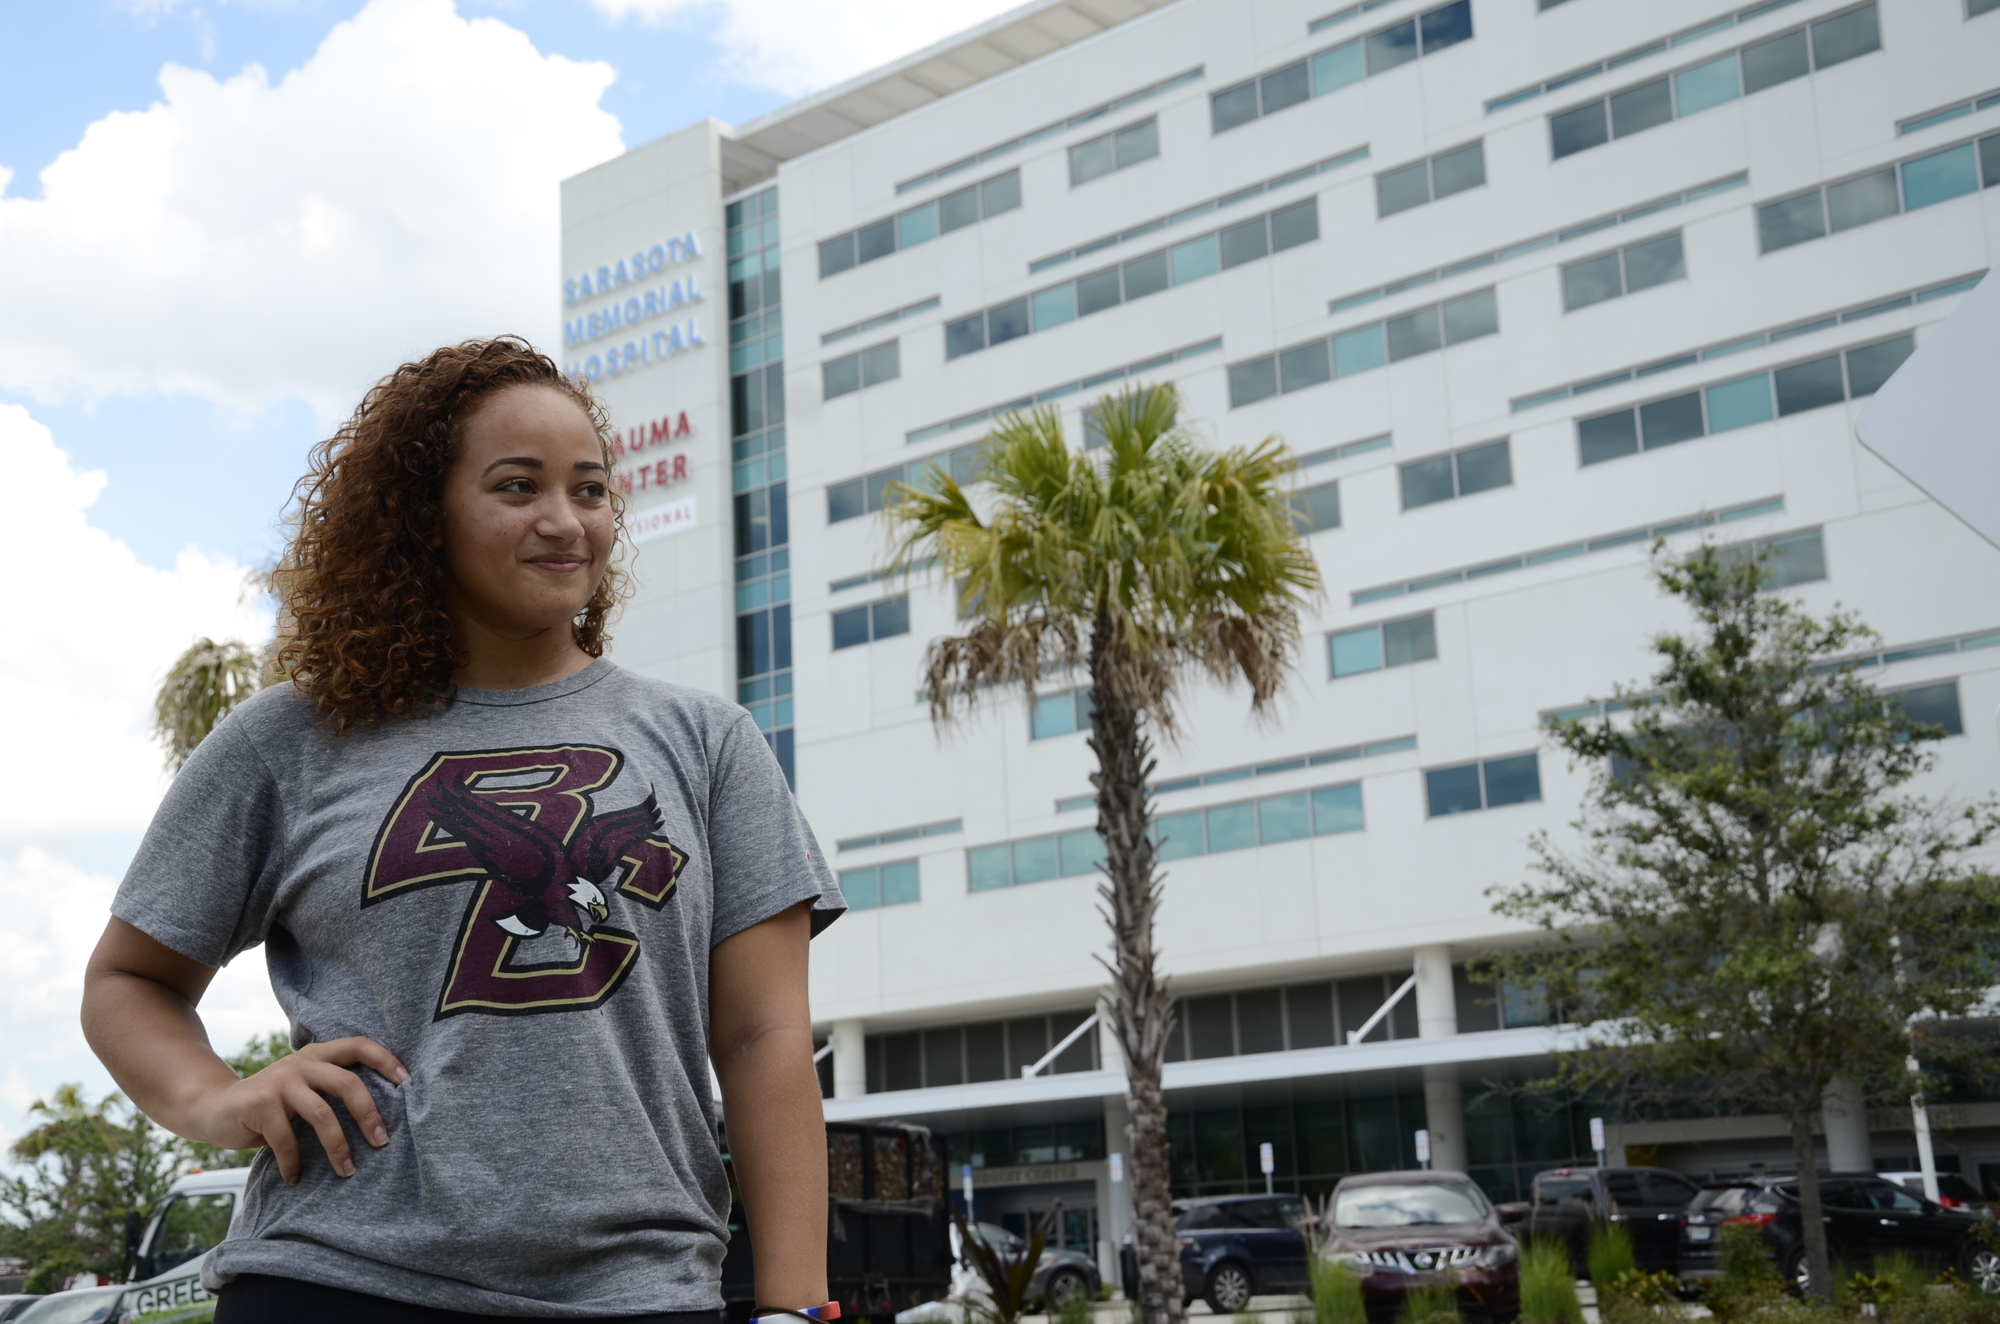 Sierra Dickerson completed an internship at Sarasota Memorial Hospital. While there, she realized she wanted to be the kind of doctor who gets to interact with her patients.